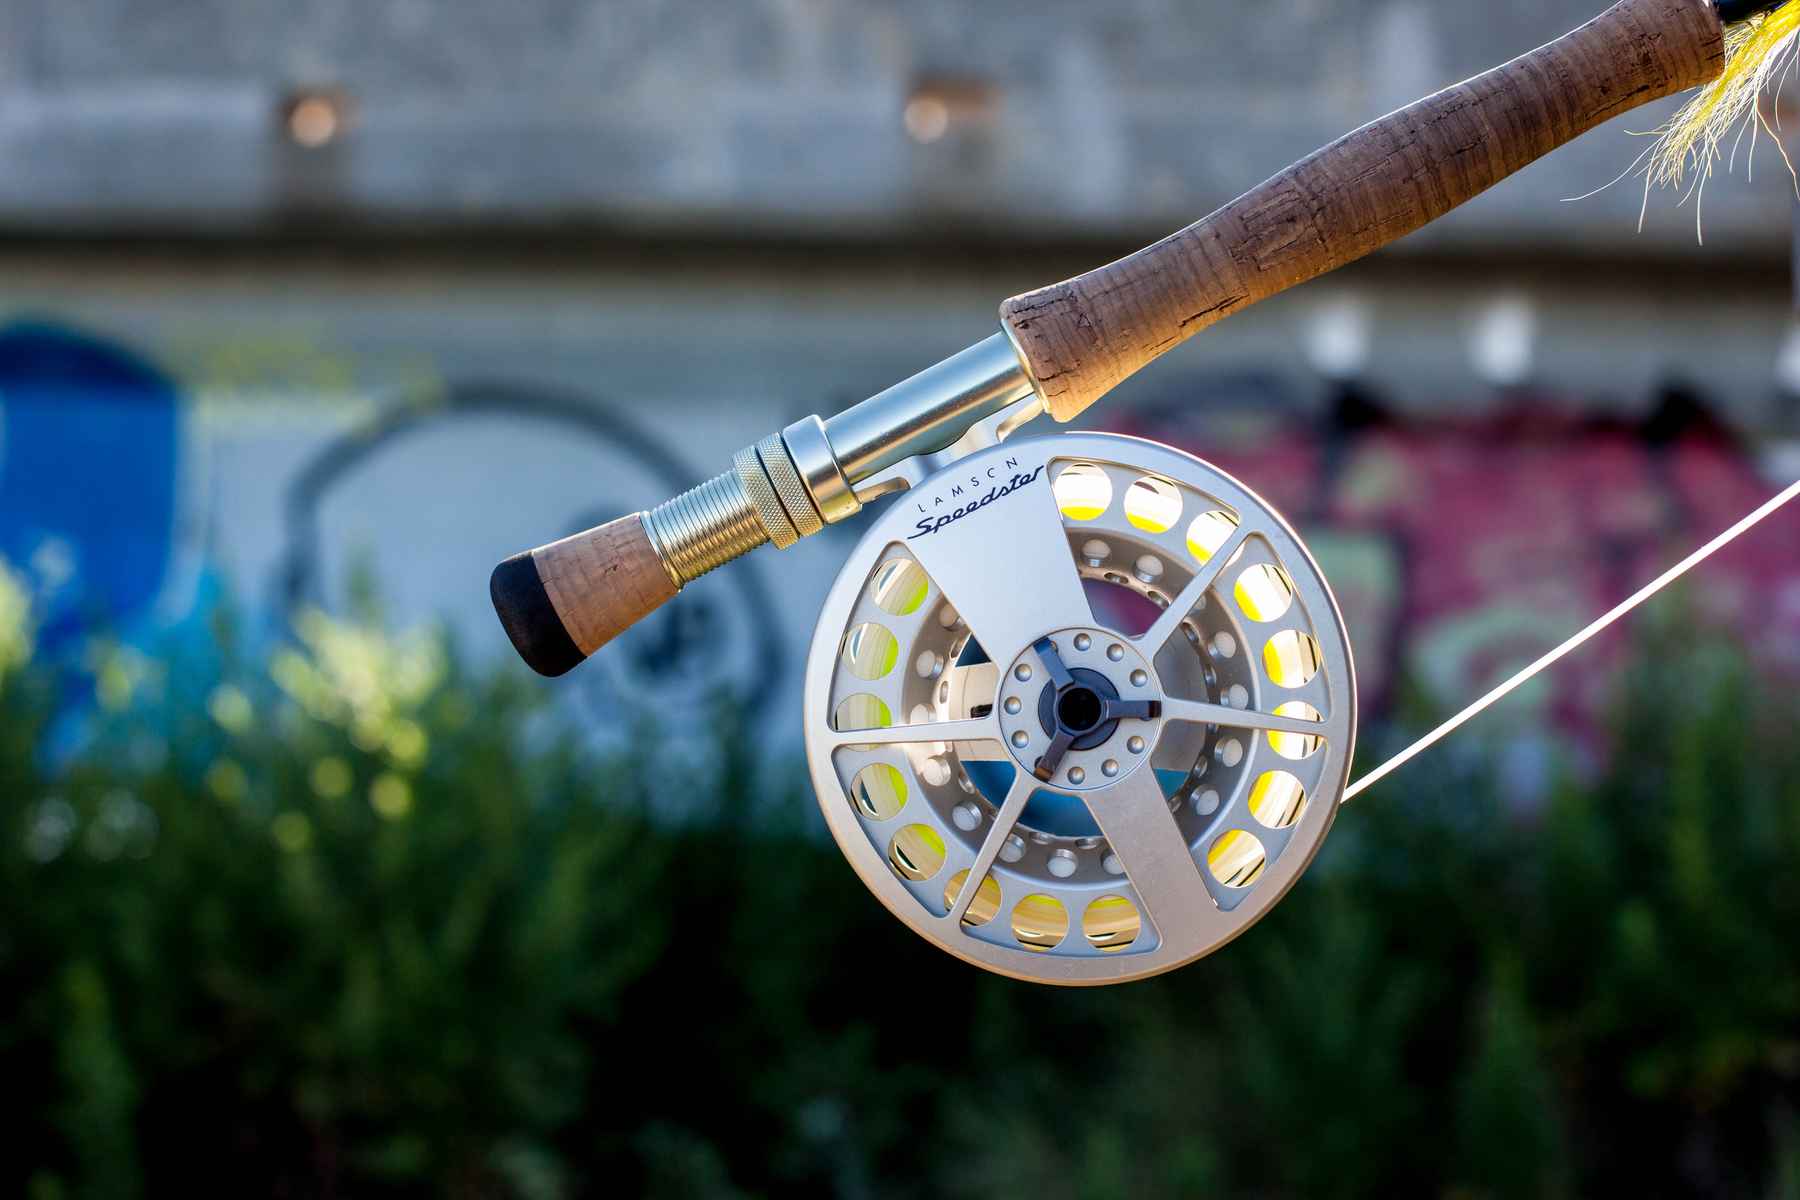 Hatch - Premium Fly Fishing Reels - Another rad shot from